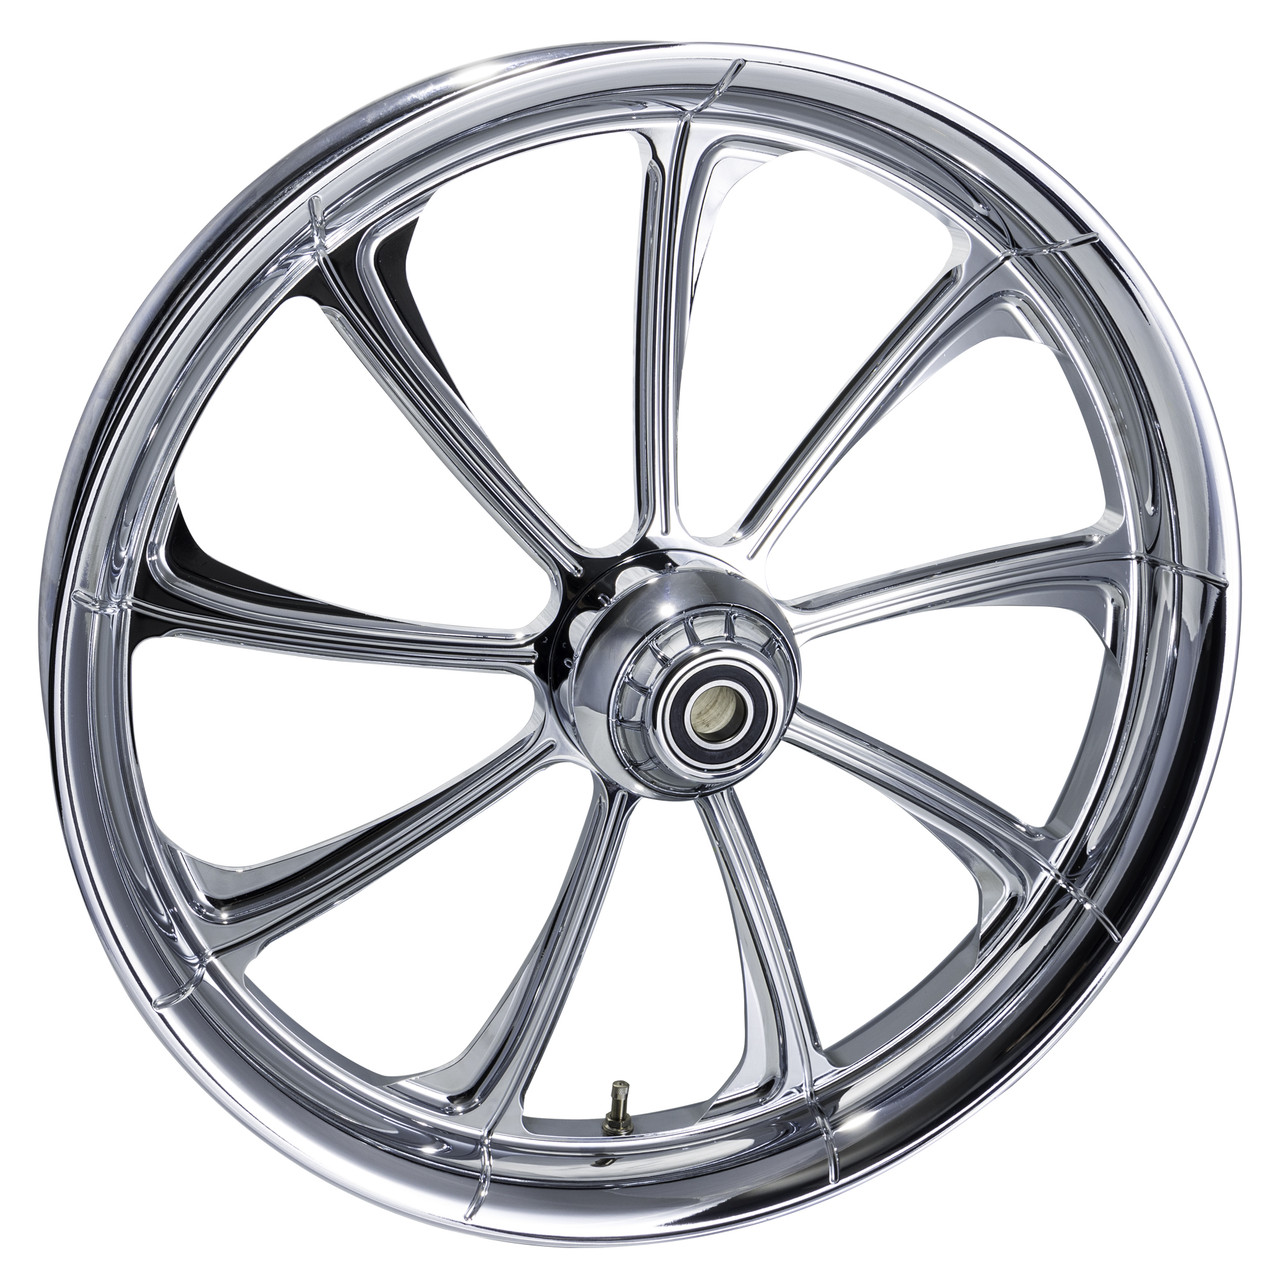 Indian Chieftain Motorcycle Wheels Glide